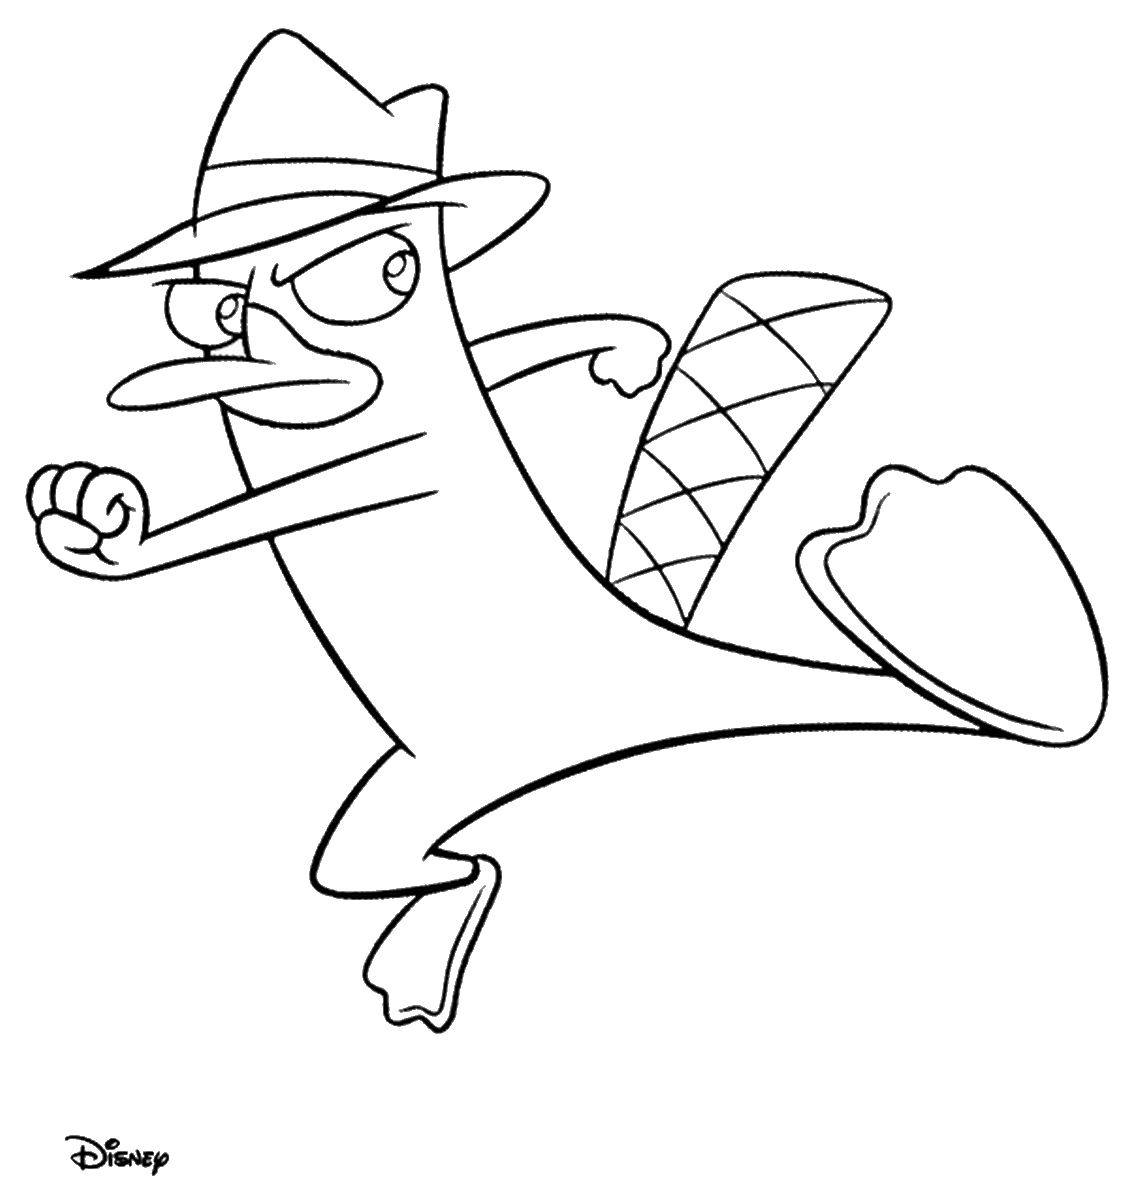 Phineas and Ferb Coloring Pages TV Film phineas_ferb_cl_07 Printable 2020 06163 Coloring4free